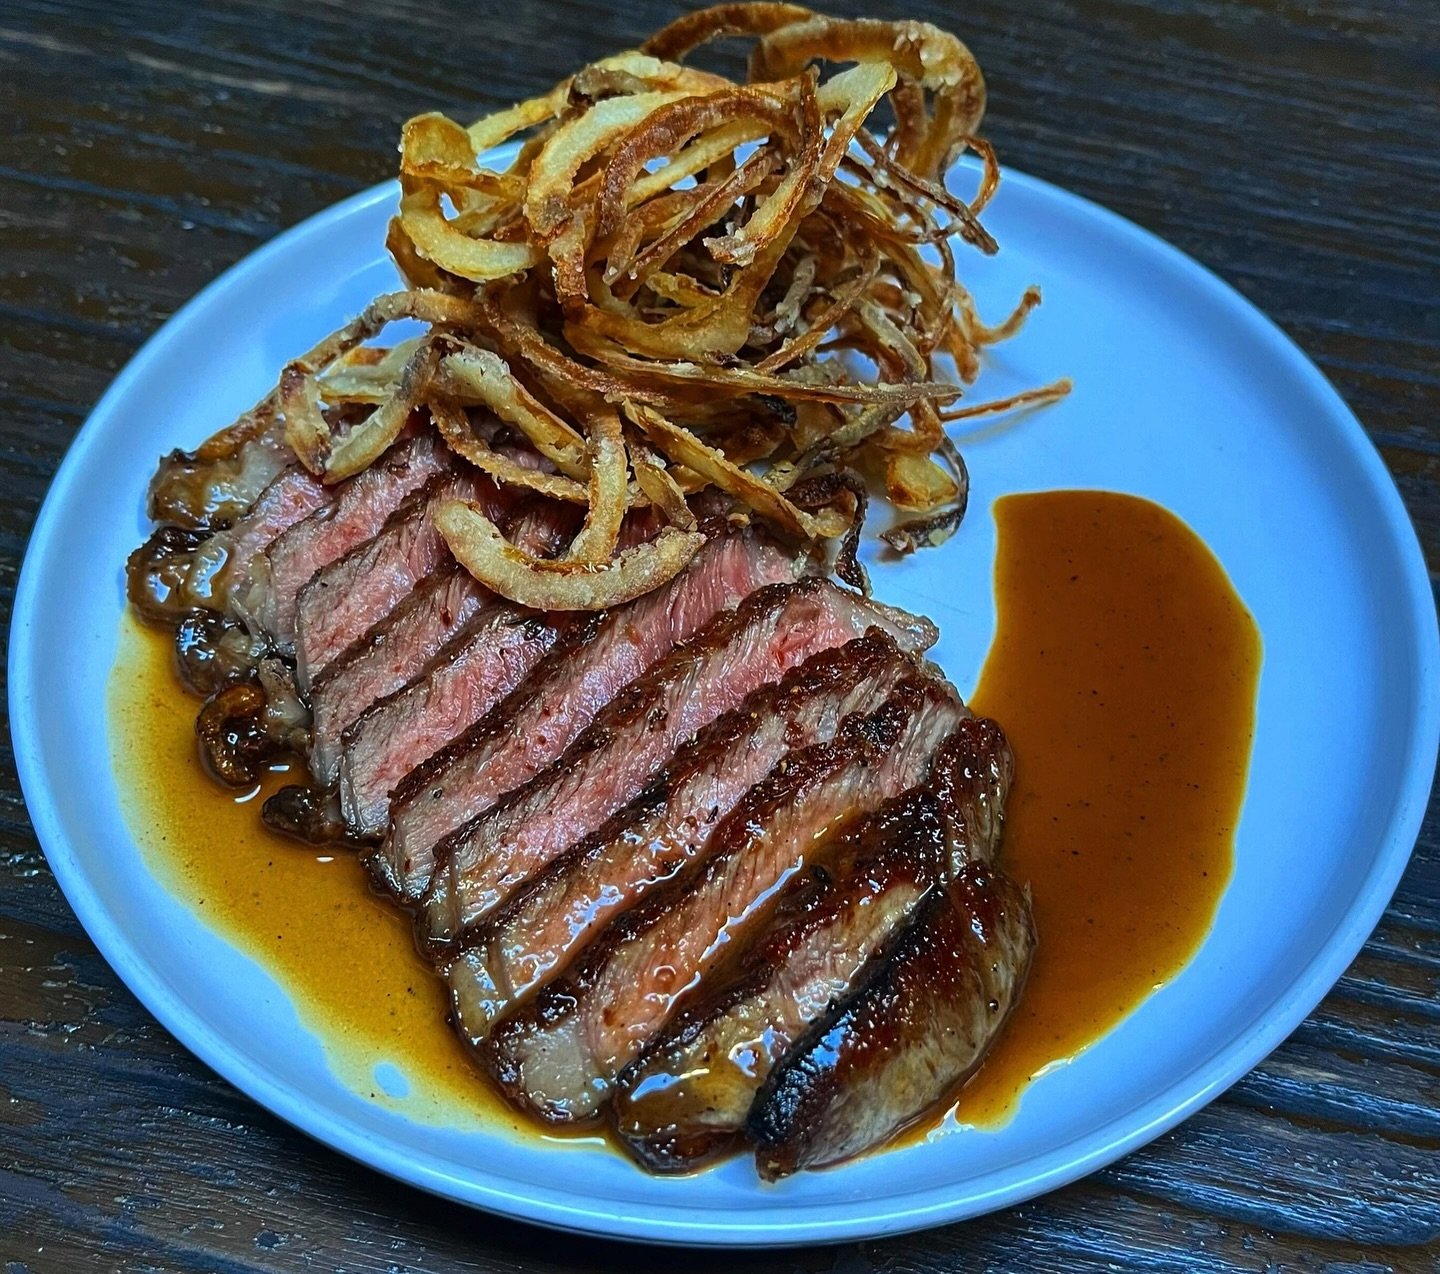 AAA = Appetite Appeal Achieved

Magnificent plating of this pan-fried @OConnorBeef striploin, roasted garlic butter &amp; pan juices, crispy onions

Thank you for sharing @chef.rick.welch and @andaluzbar